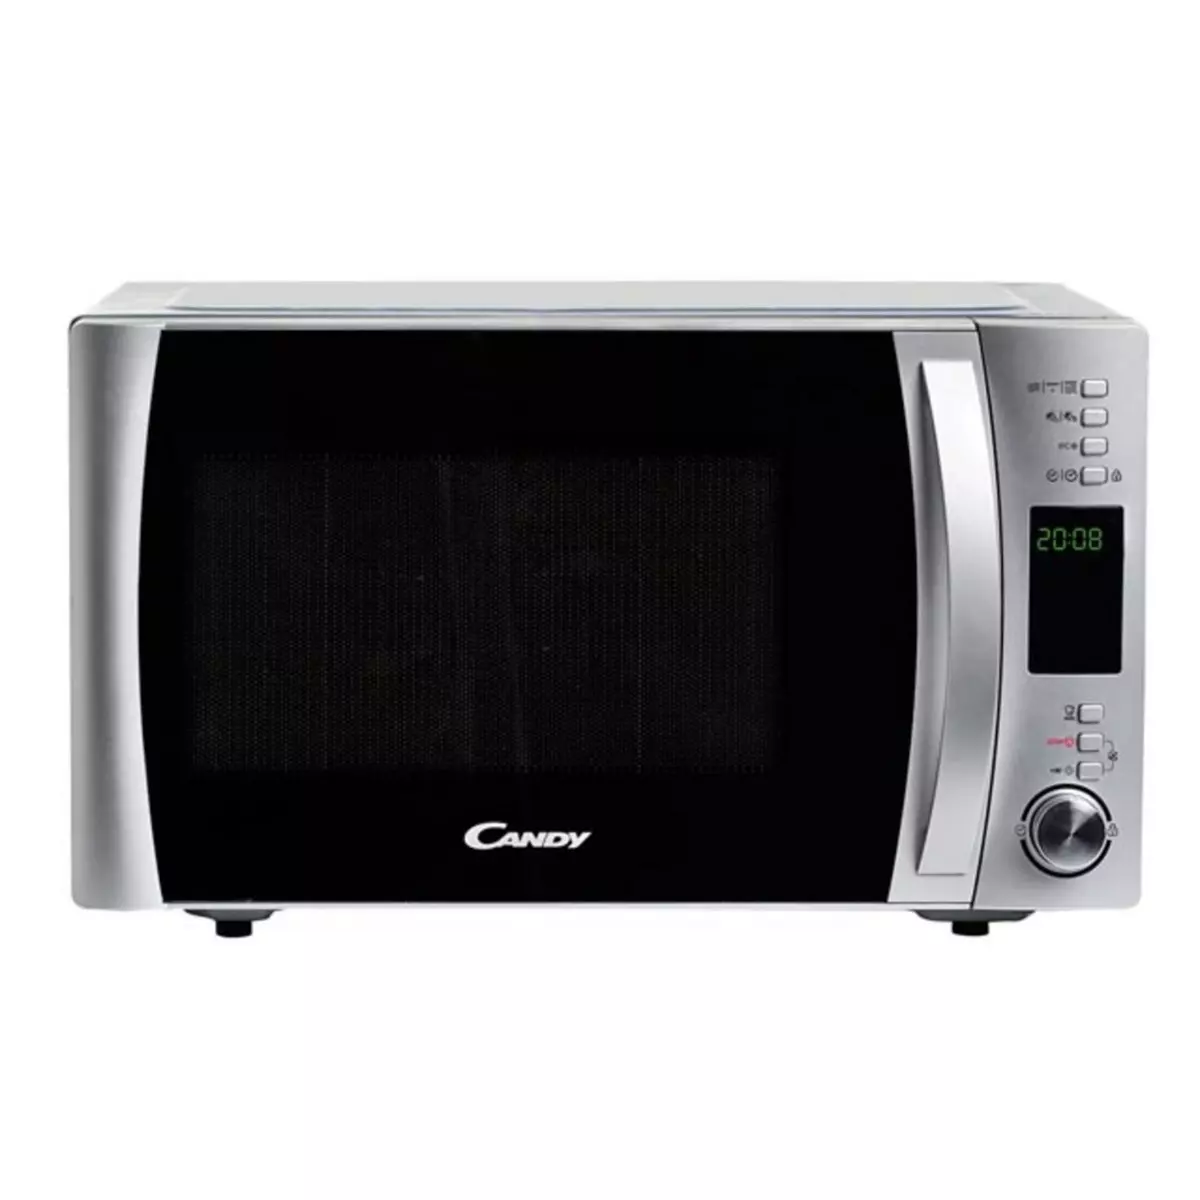 CANDY Micro-ondes Grill CMXG 30DS - 900 W - Capacité 30 L - Inox